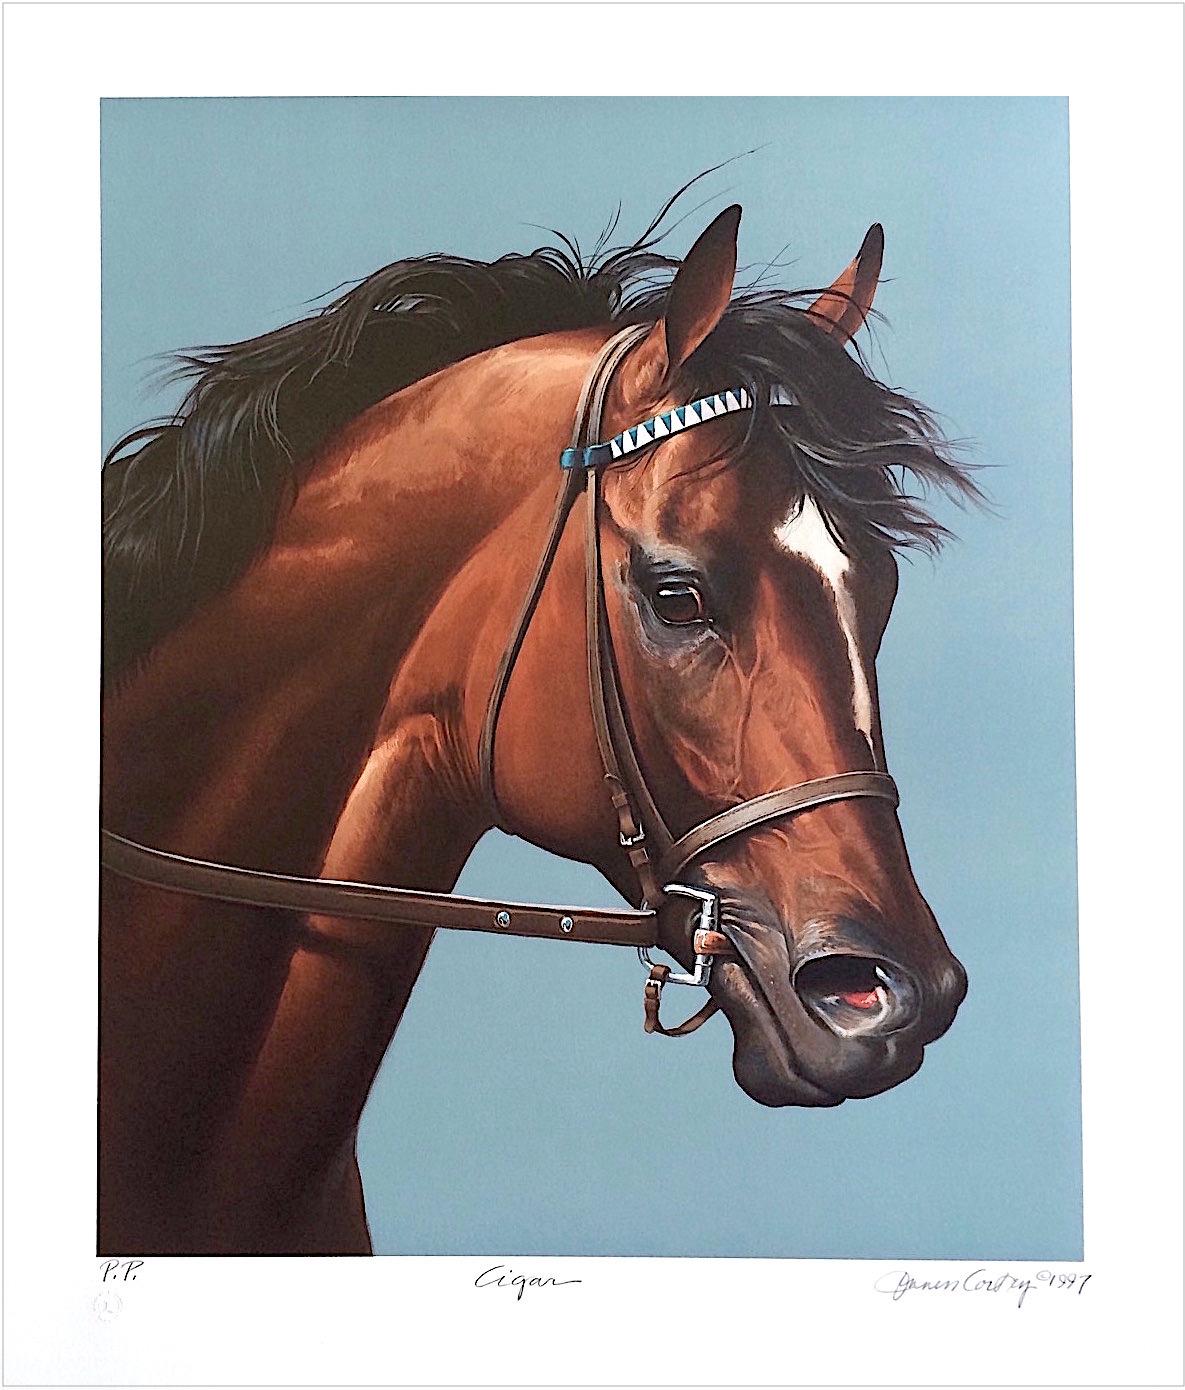 CIGAR-Champion Horse Portrait Signed Lithograph Equine Art, Horse Racing History - Gray Animal Print by Jenness Cortez